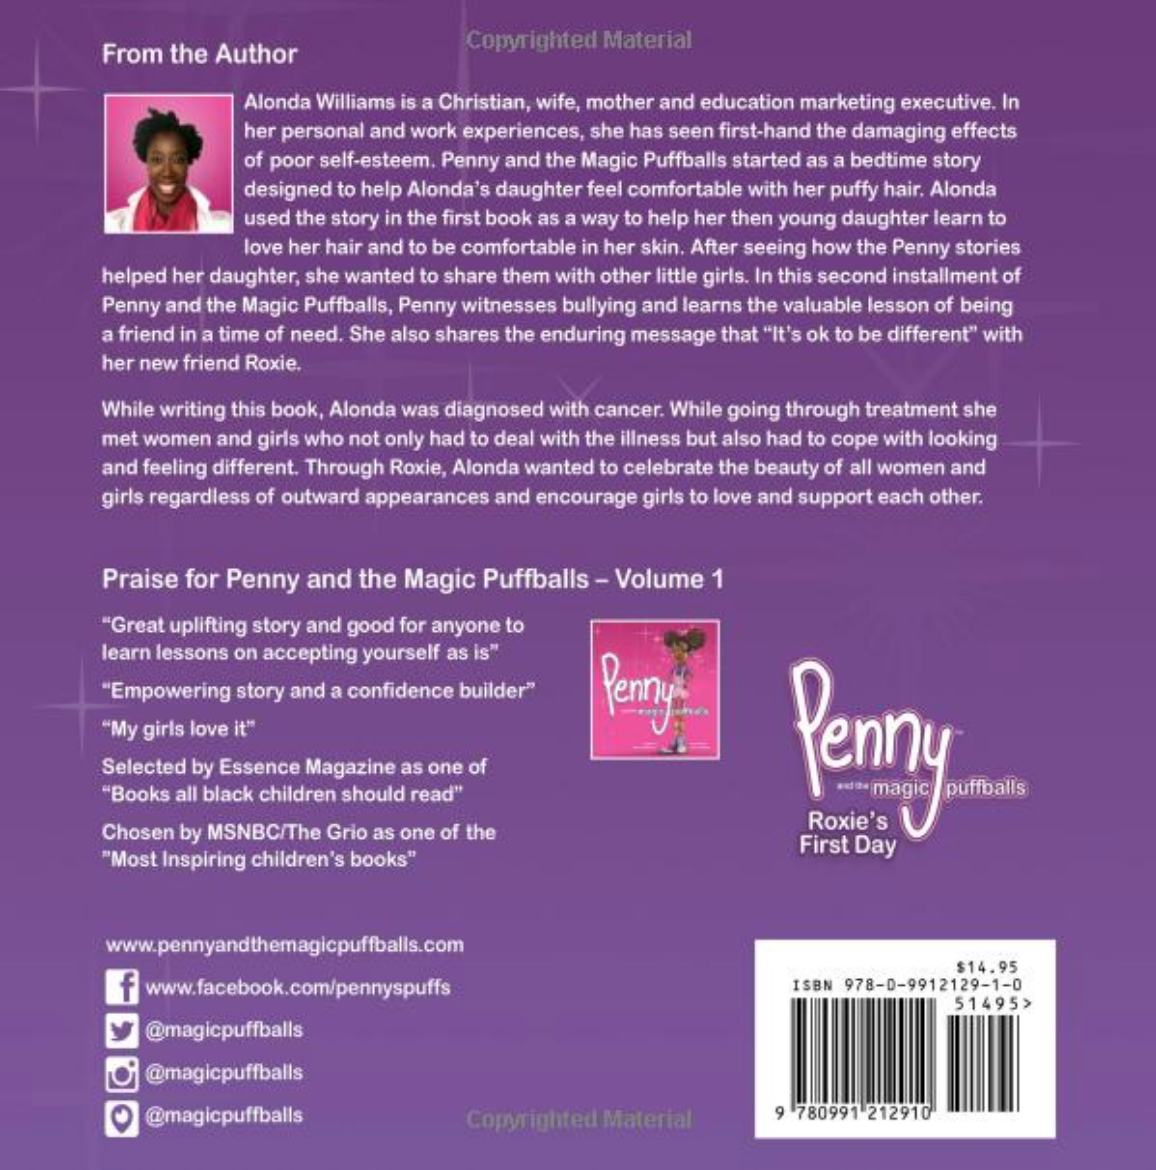 Penny and the Magic Puffballs Volume 2: Roxie's First Day